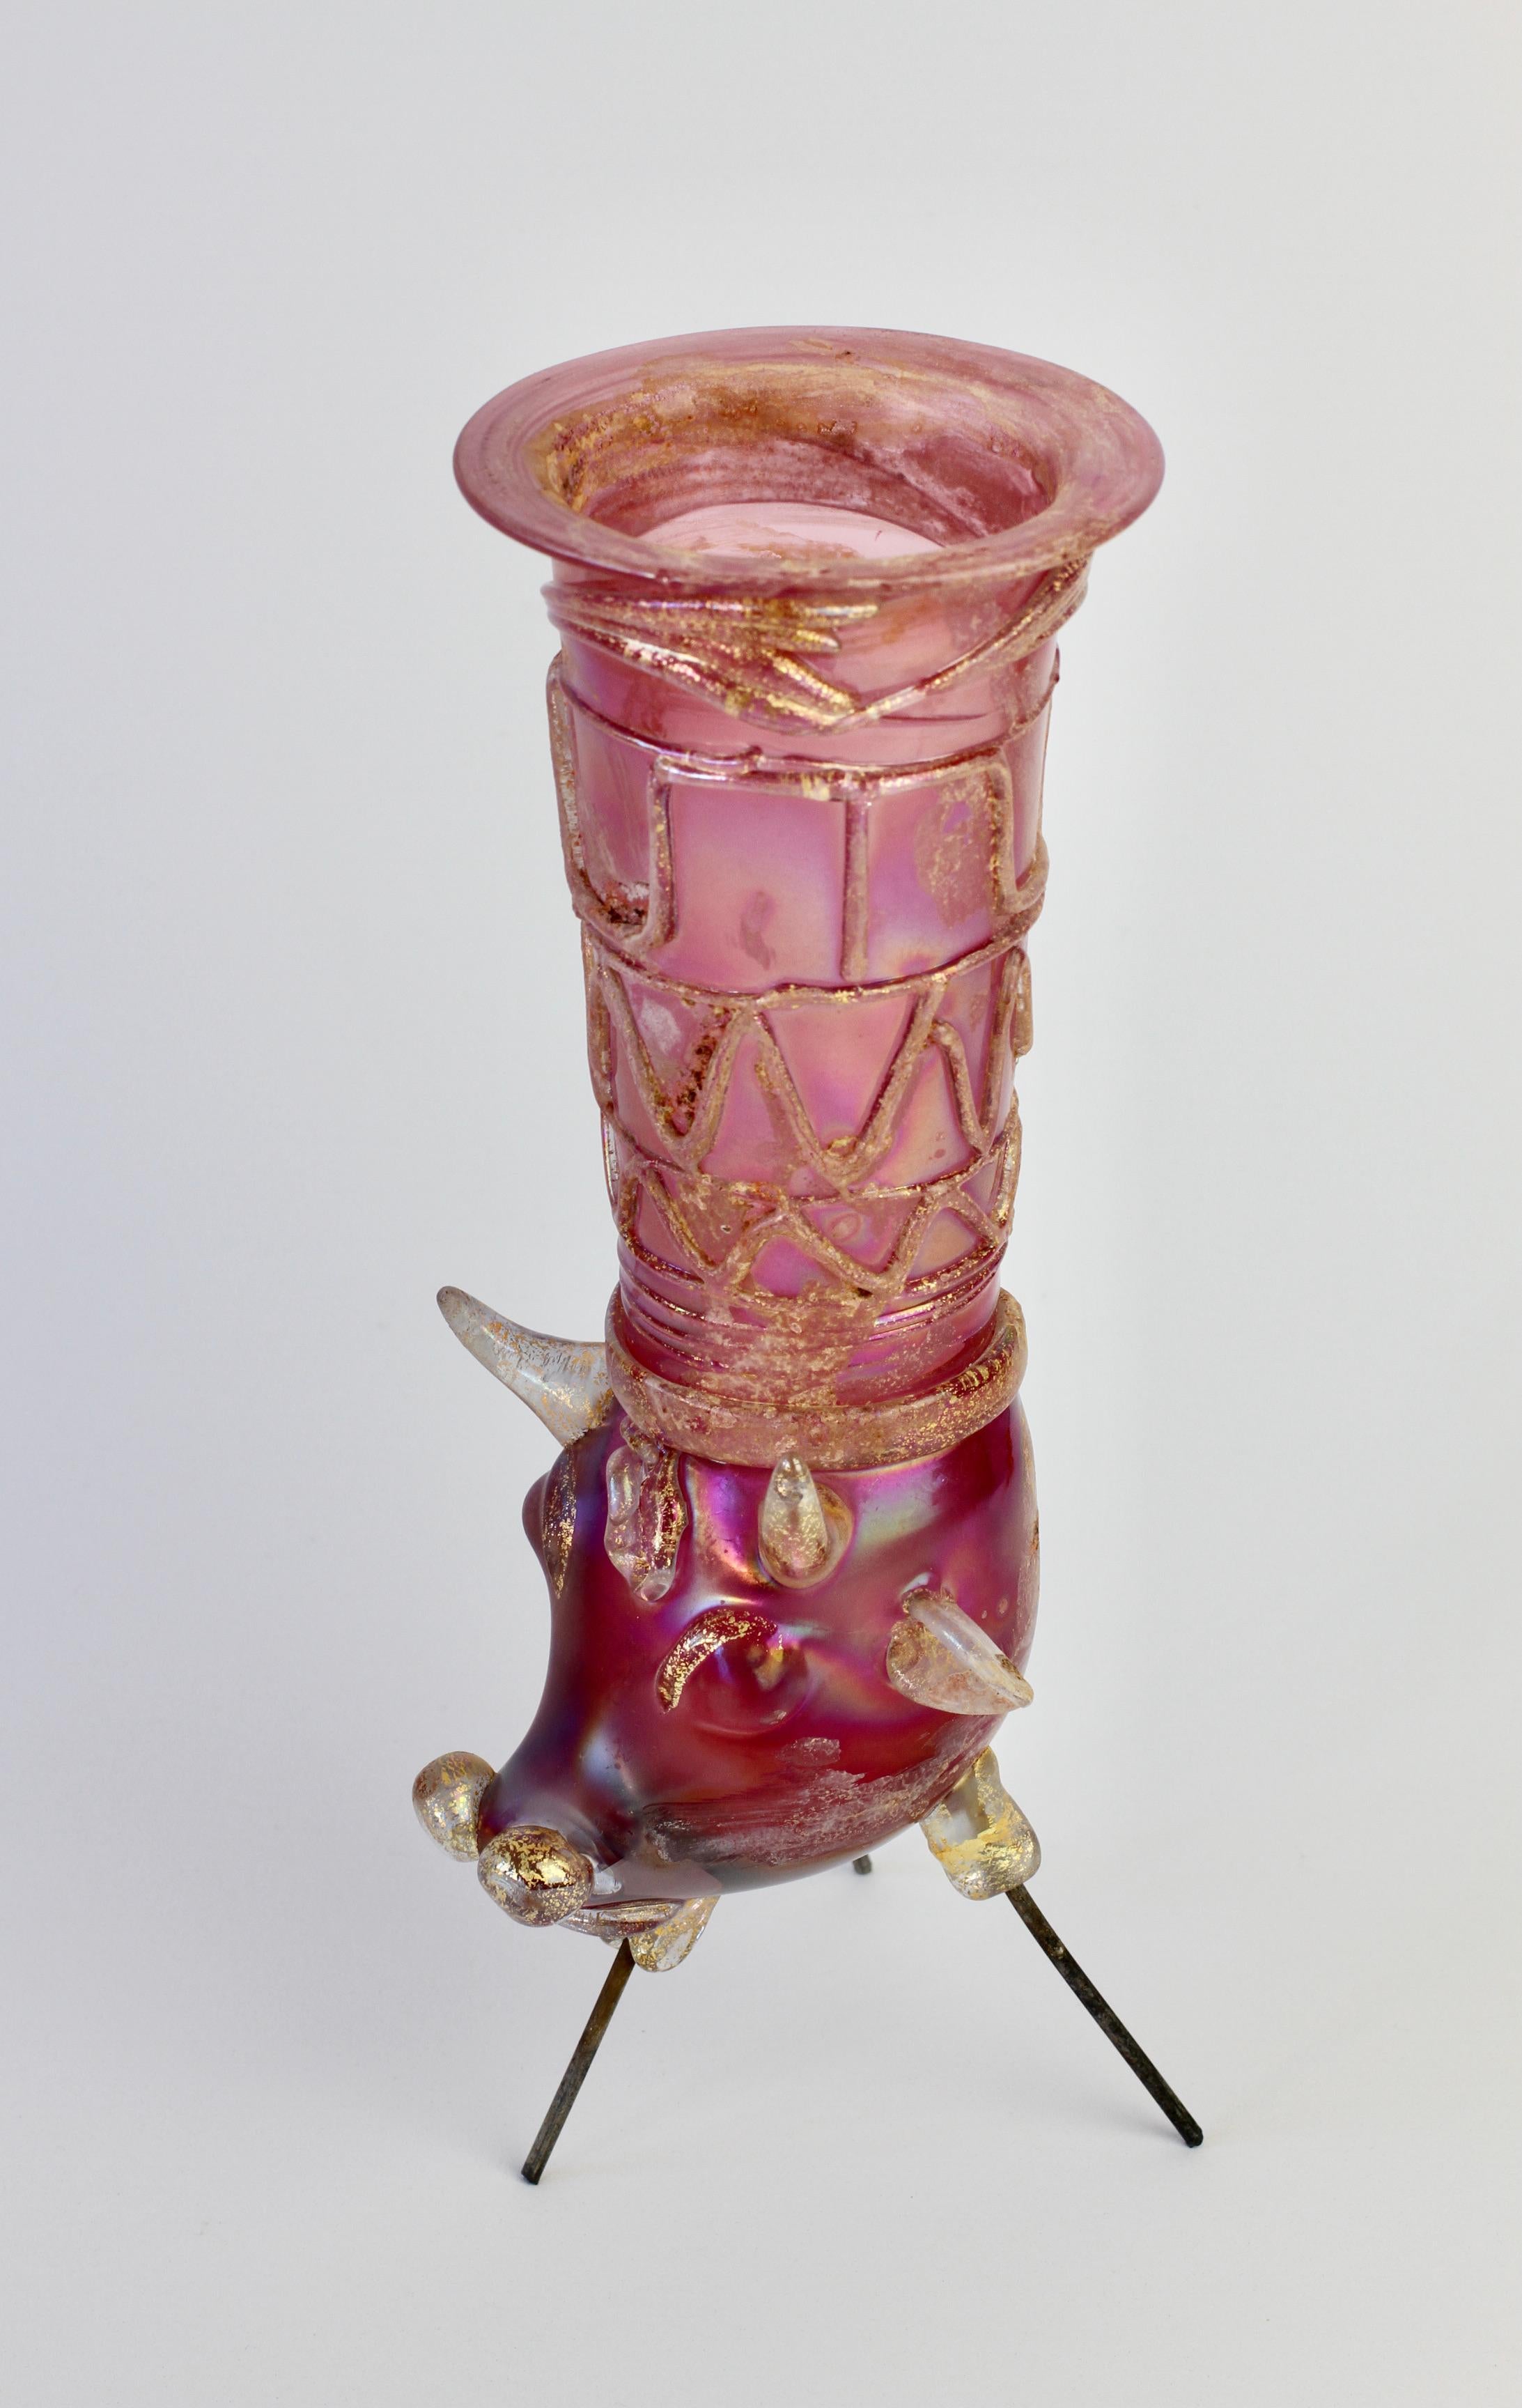 Stunning, rare and important vintage midcentury centre vase / vessel by Ermanno Nason for Cenedese Vetri of Murano, Italy. An absolutely stunning piece of Mid-Century Murano glass - particularly striking is it's elegant form and pink color/colour.